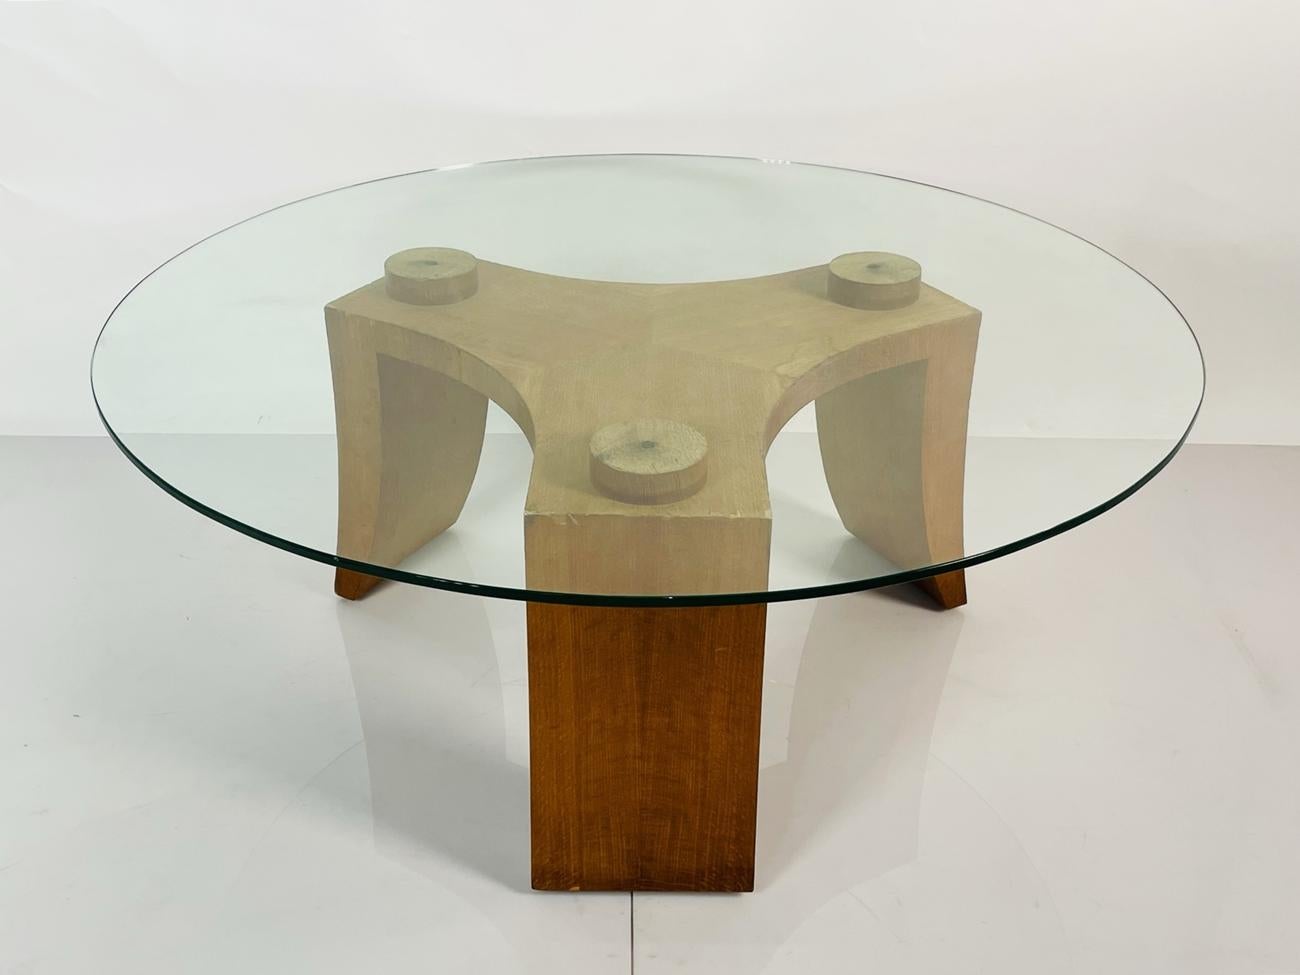 Beautiful coffee table with a sculpted wooden base and a large round glass top.

The table is very reminiscent of designs by Vladimir Kagan.The table is well daseigned and beautifully executed.

Measurements:
52 inches in diameter x 21 inches high.